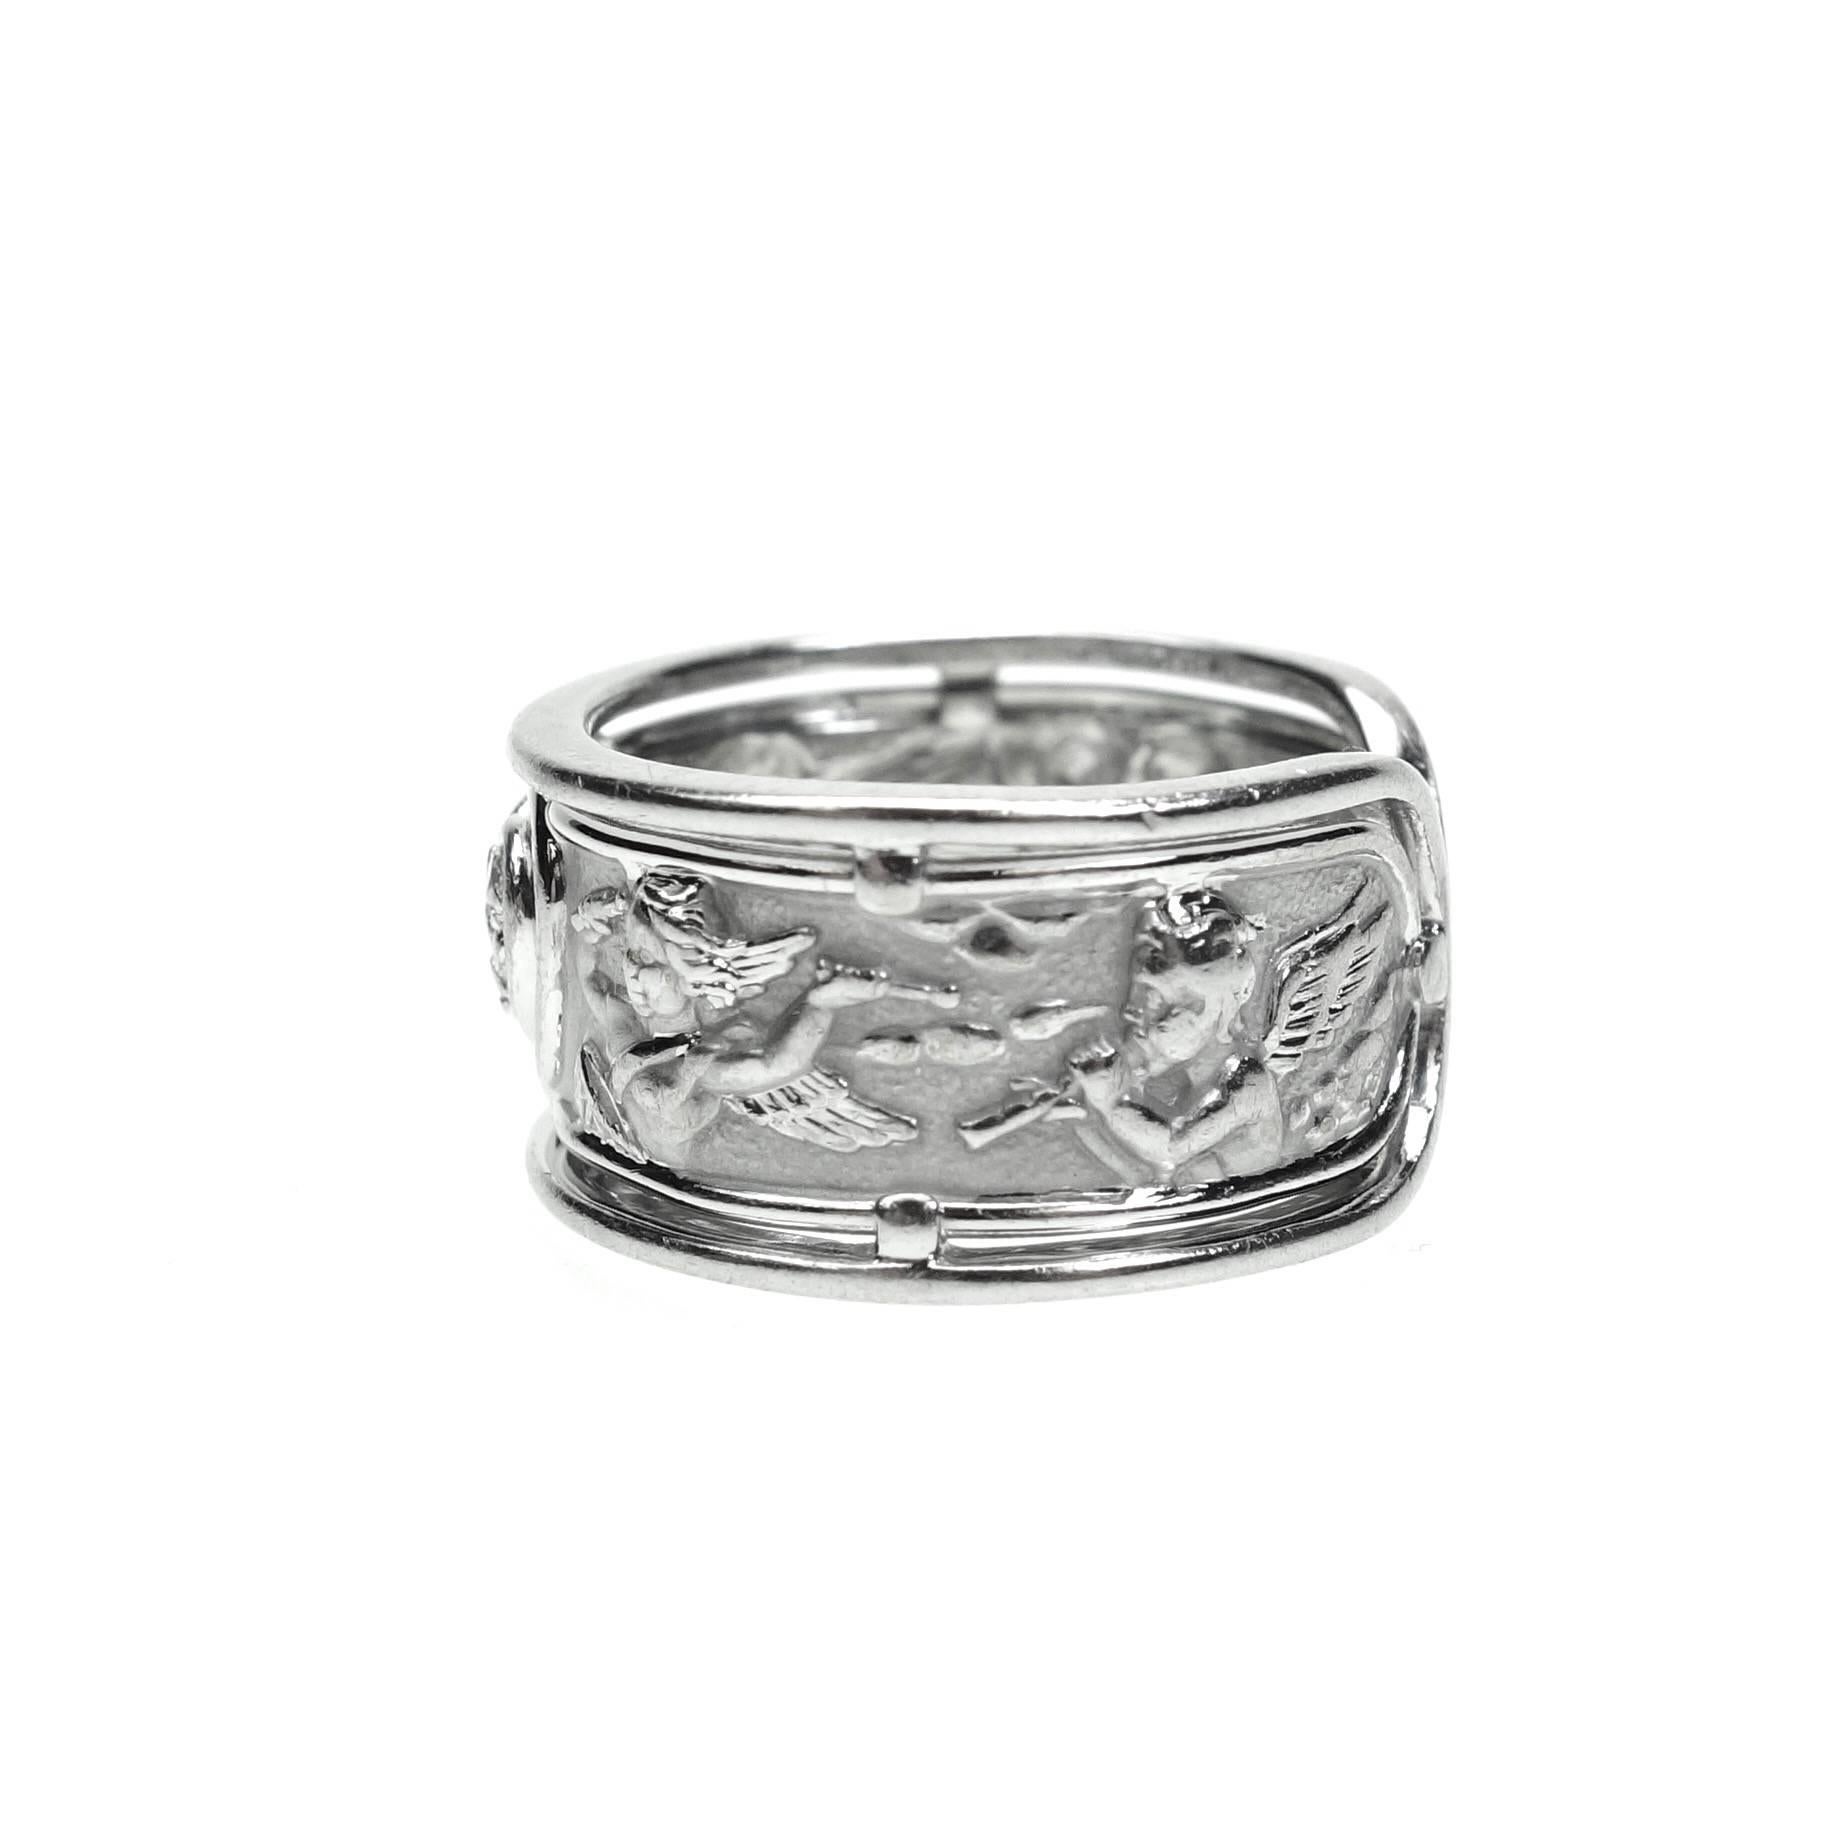 Carrera y Carrera RONDA Angels 18K white gold  wide band with diamonds.
Style # 260171
Motif: Heart & Angels Band
Size: 7 (US)
Width: 15 mm
Weight 6.3 grams
Signed, CyC(logo) Stamped, 305593 750
Condition:
This ring is in very good pre-owned